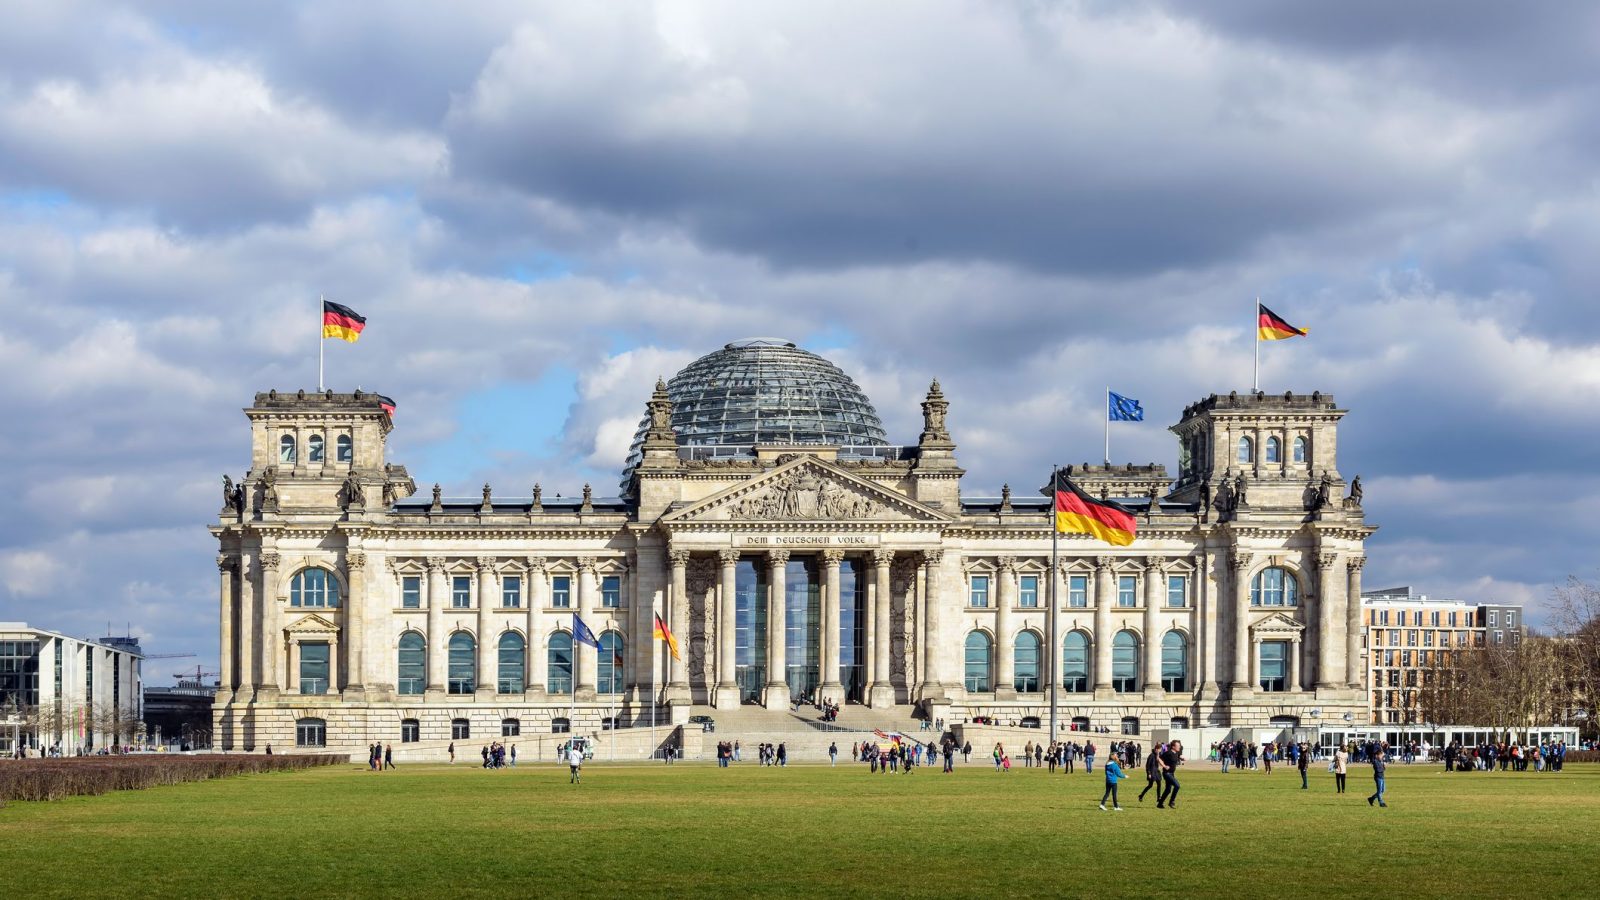 Can You Pass This 40-Question Geography Test That Gets Progressively Harder With Each Question? Reichstag, Berlin